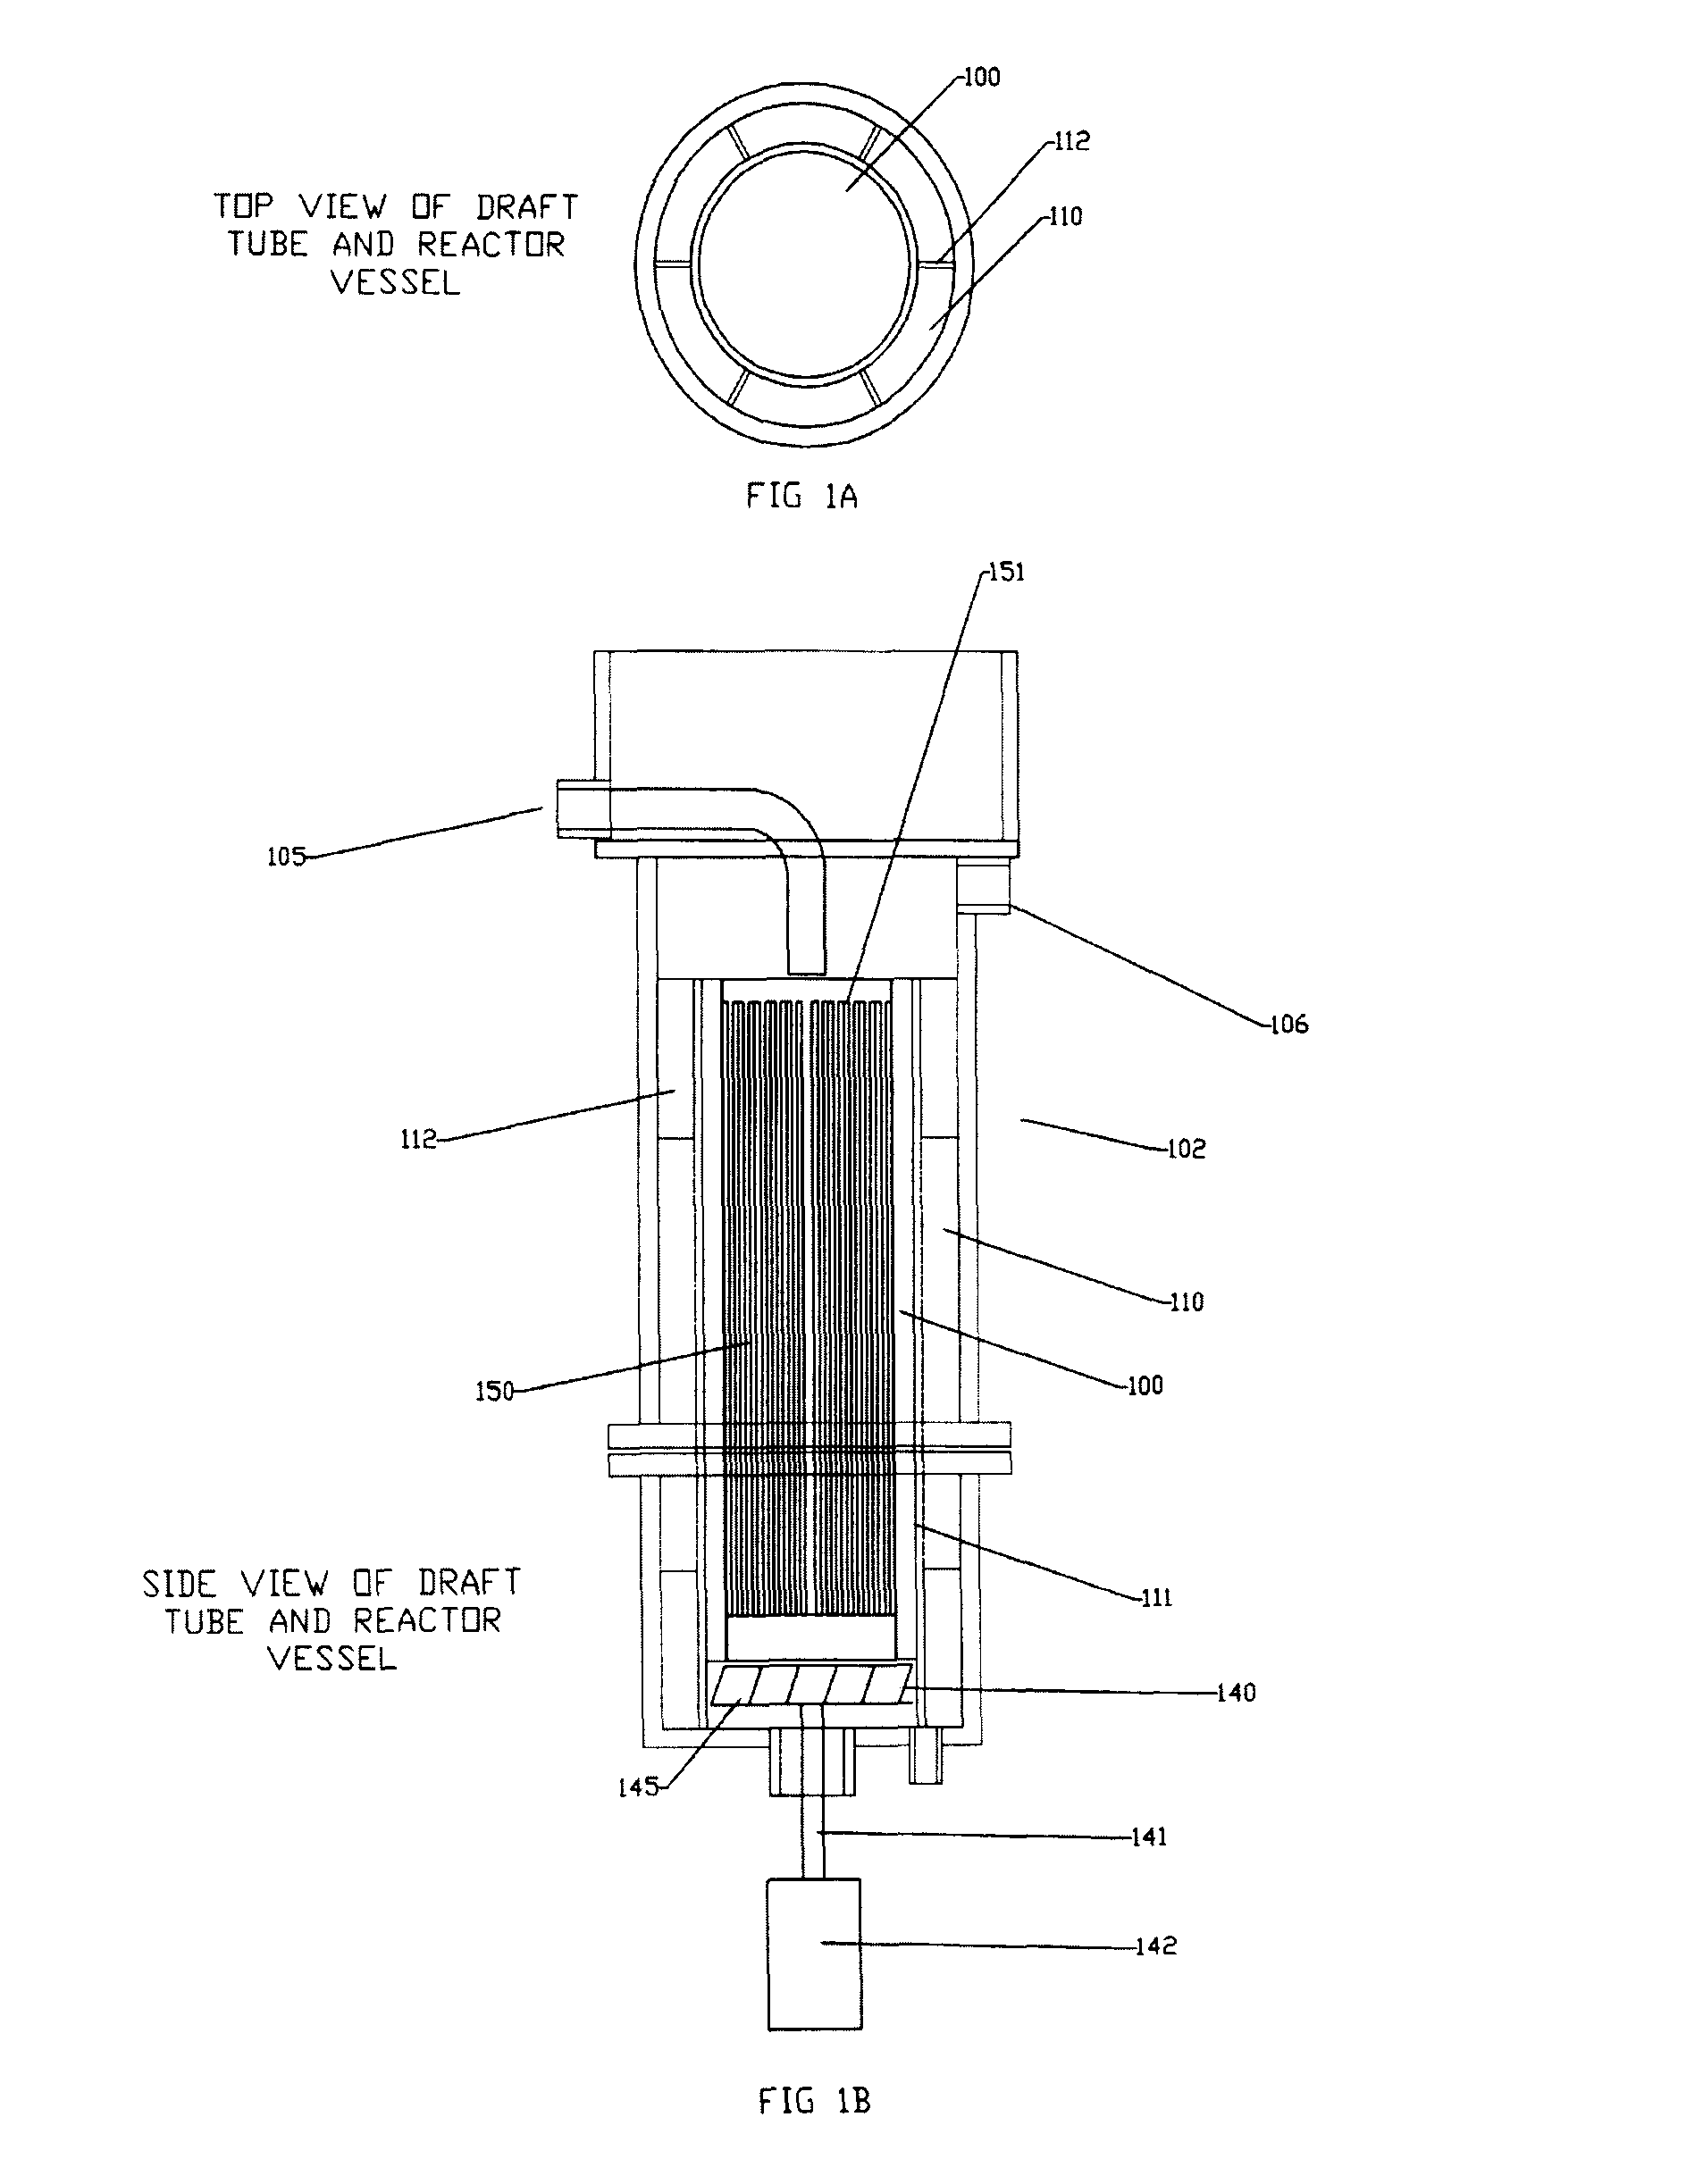 Generation of chemical reagents for various process functions utilizing an agitated liquid and electrically conductive environment and an electro chemical cell